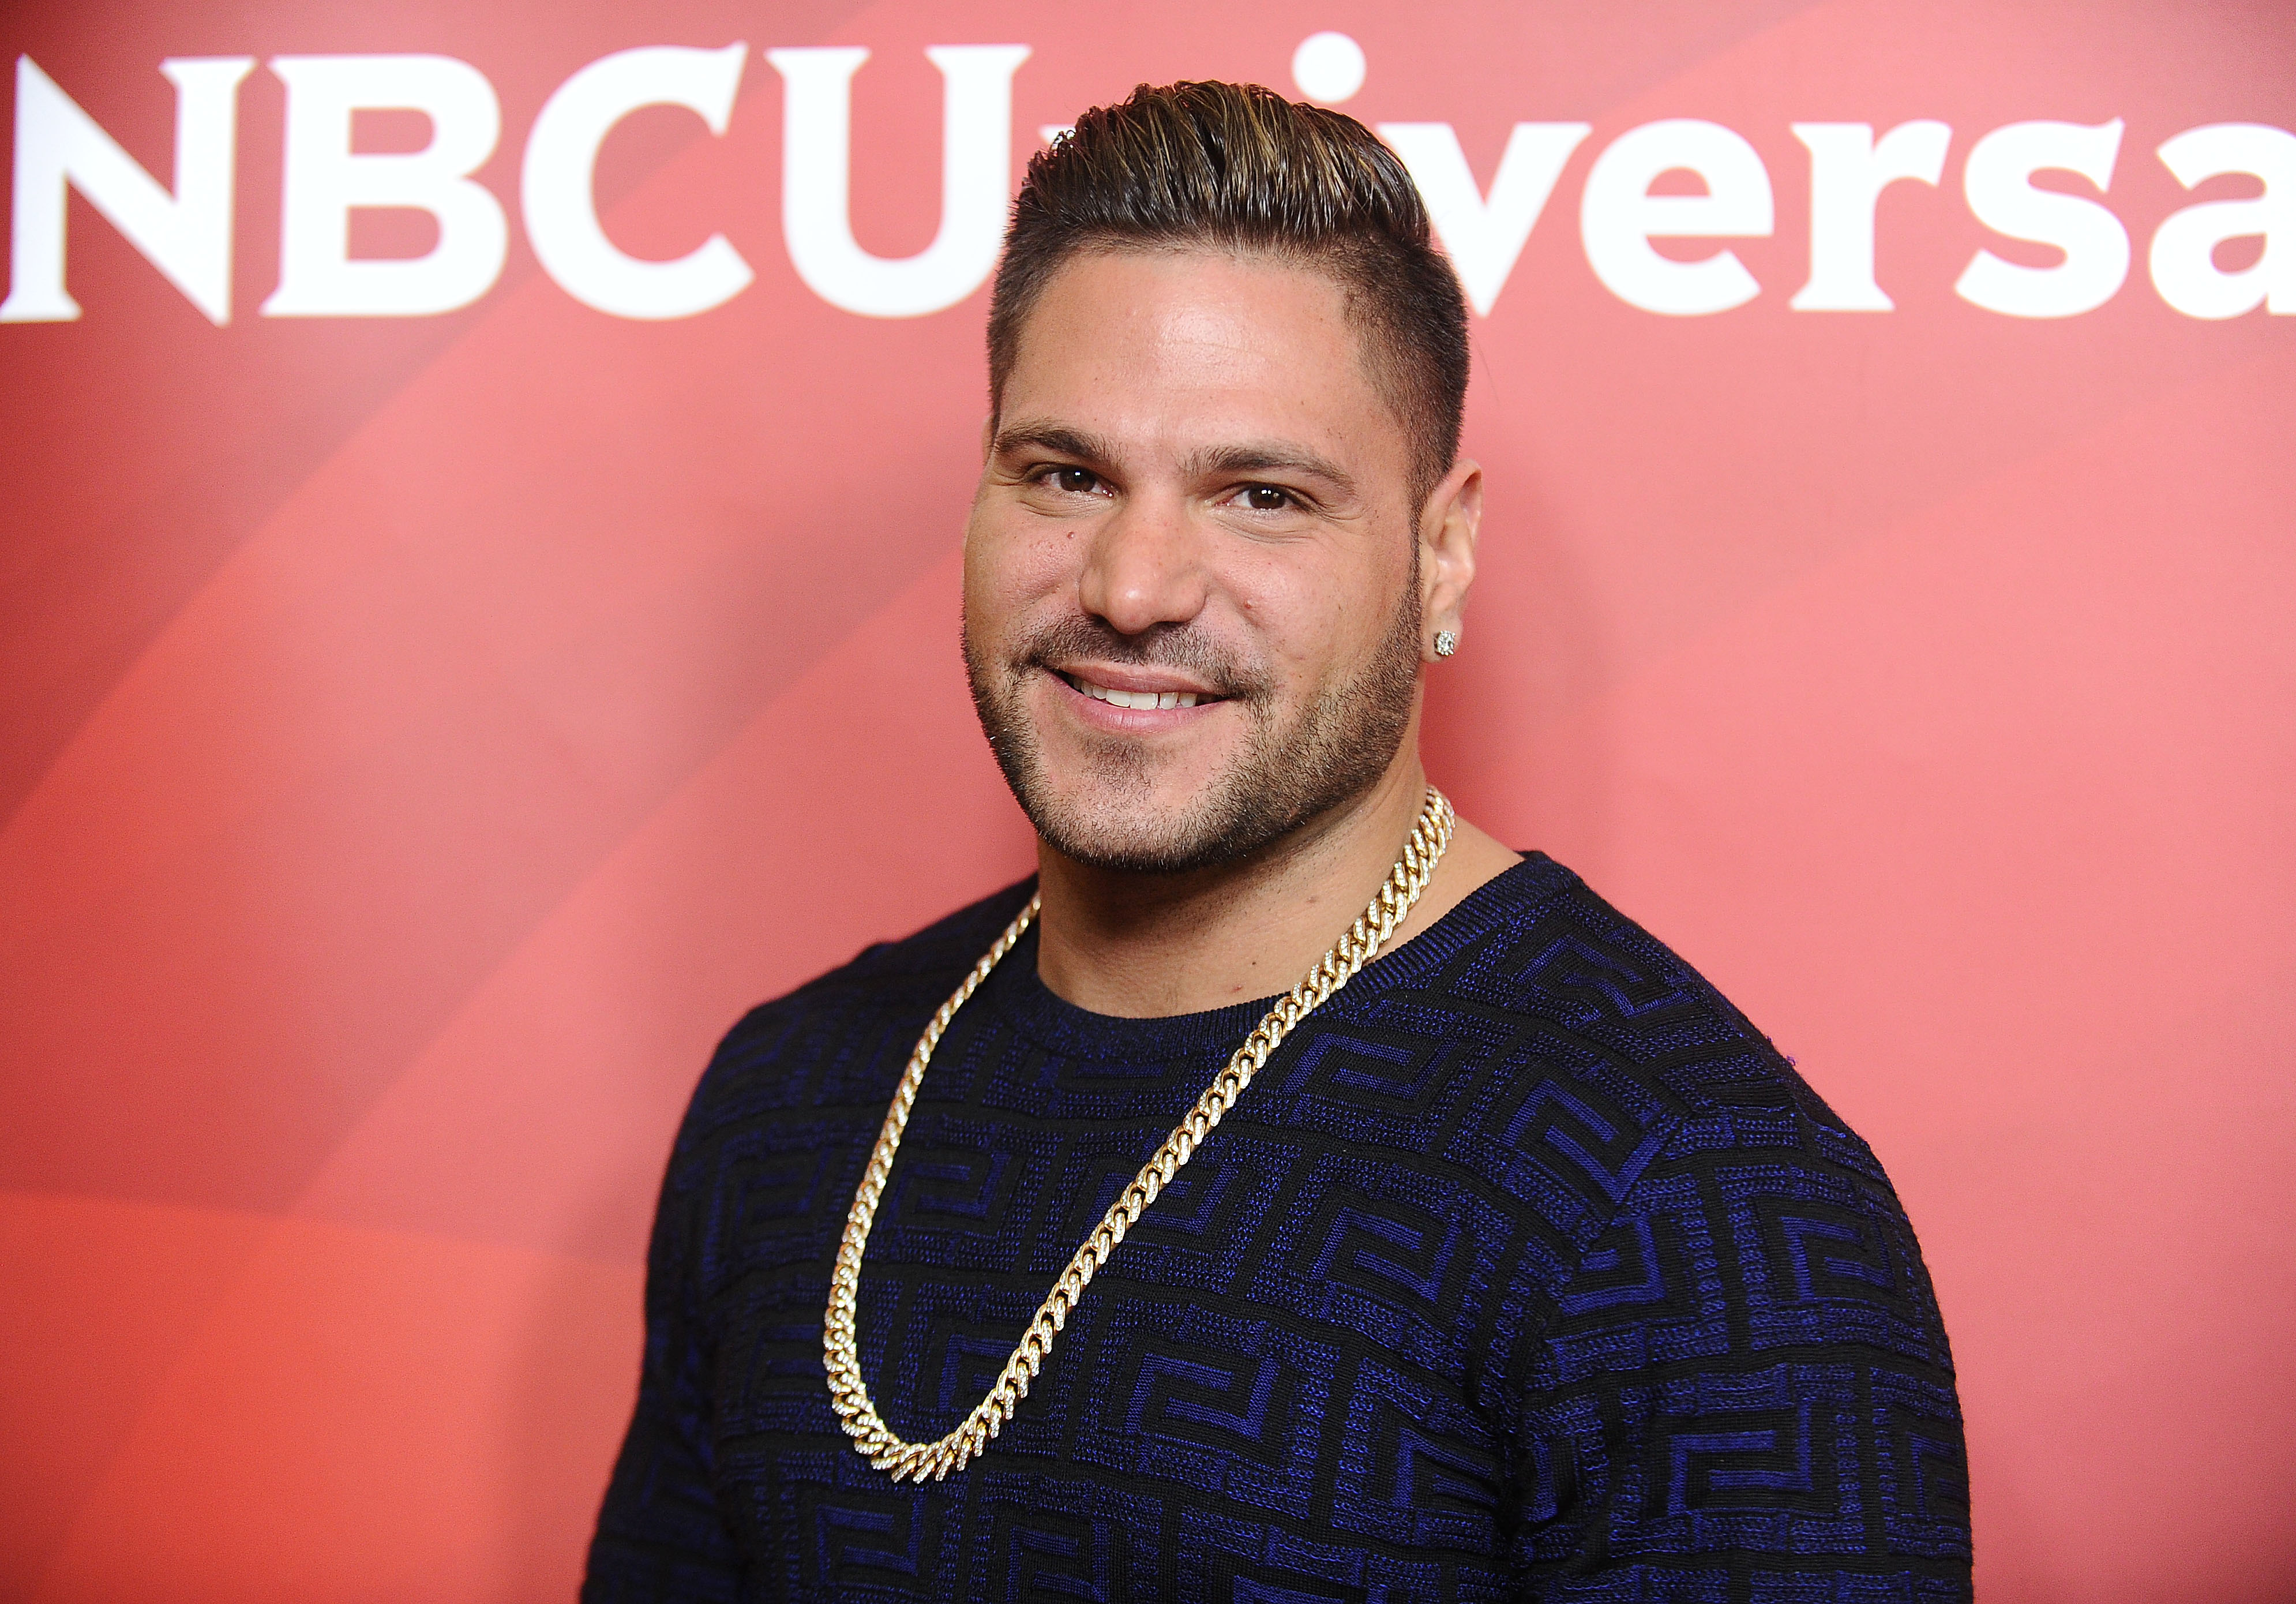 Jersey Shore': Ronnie Ortiz Magro and 2 Other Roommates Who Released Music